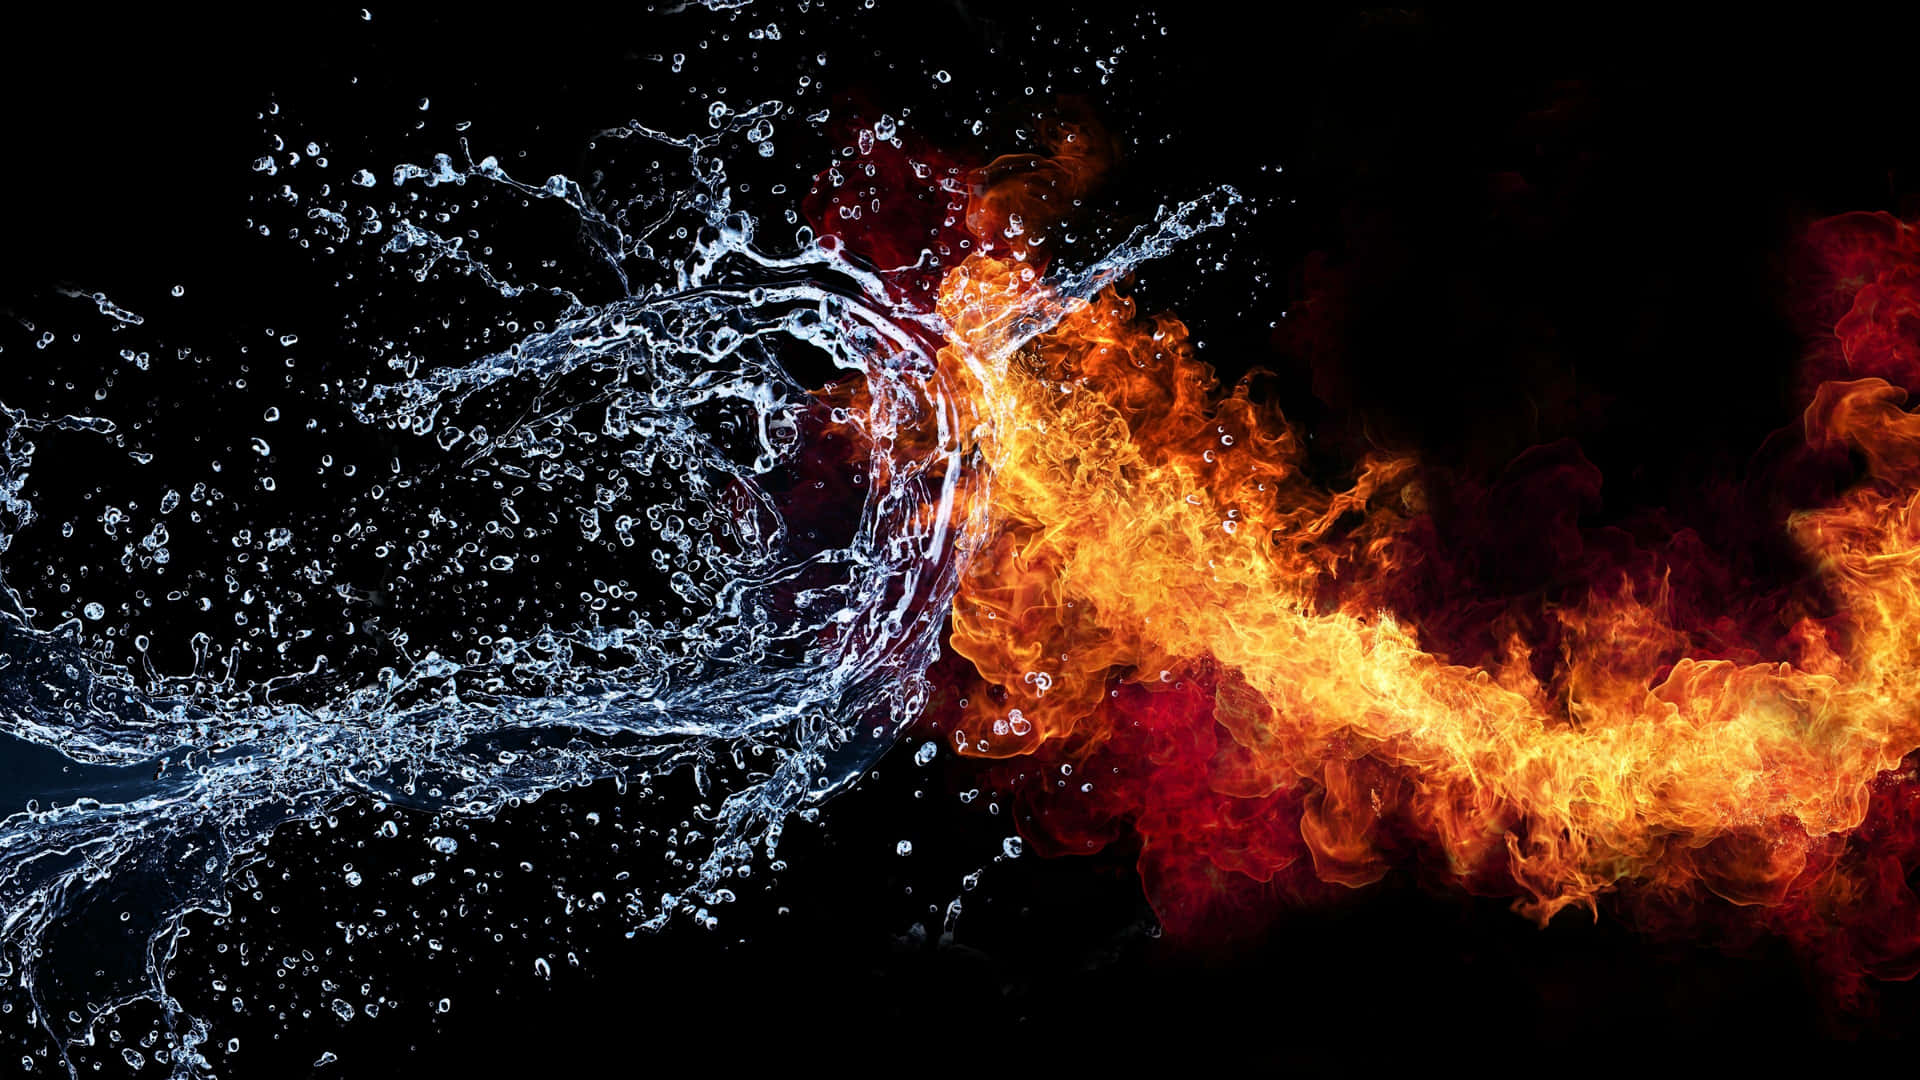 Contradictory elements, fire and water, together in balance Wallpaper